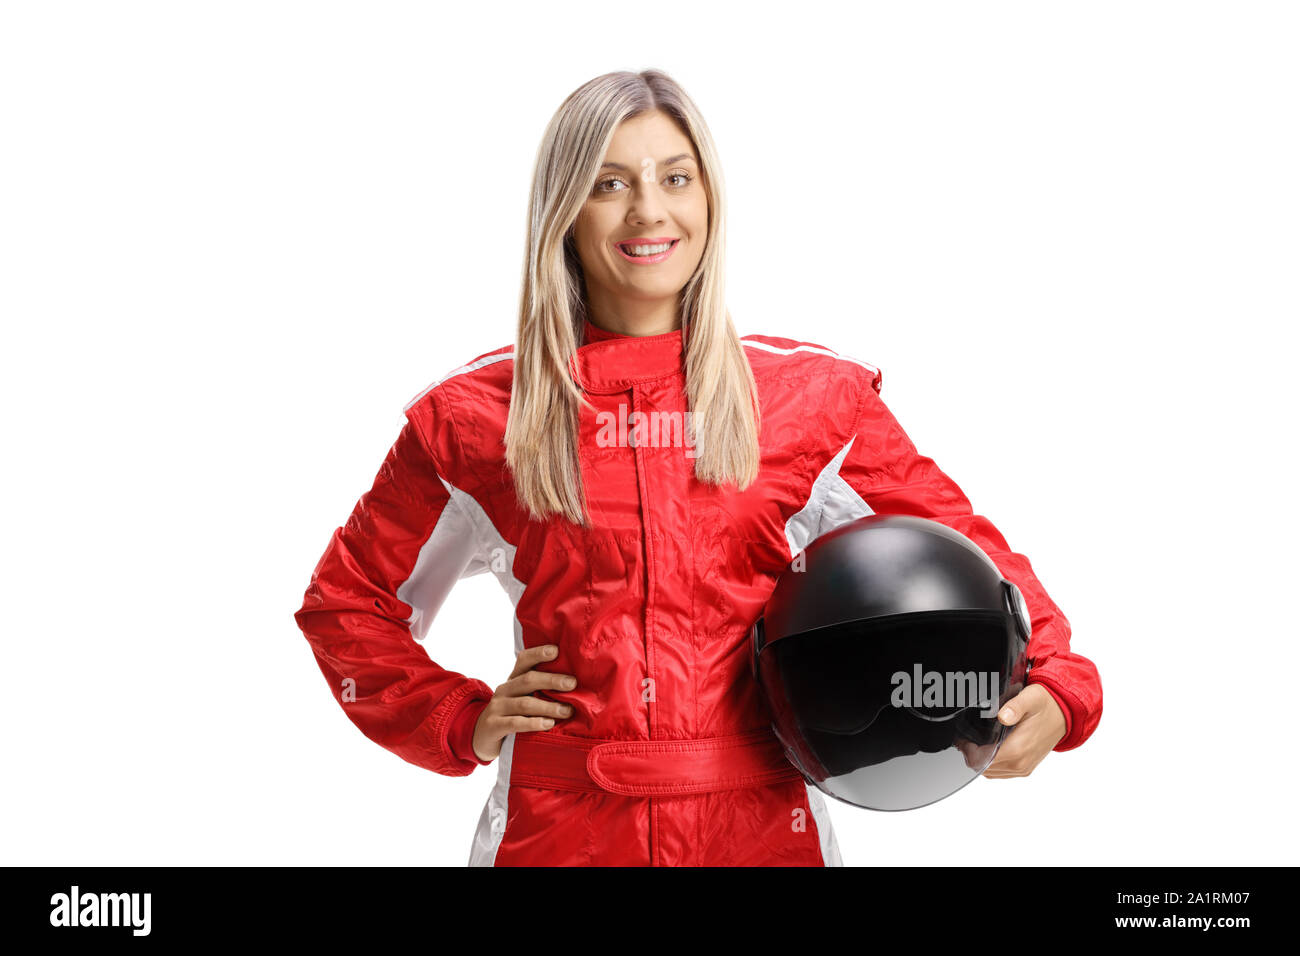 Young female racer holding a helmet isolated on white background Stock Photo